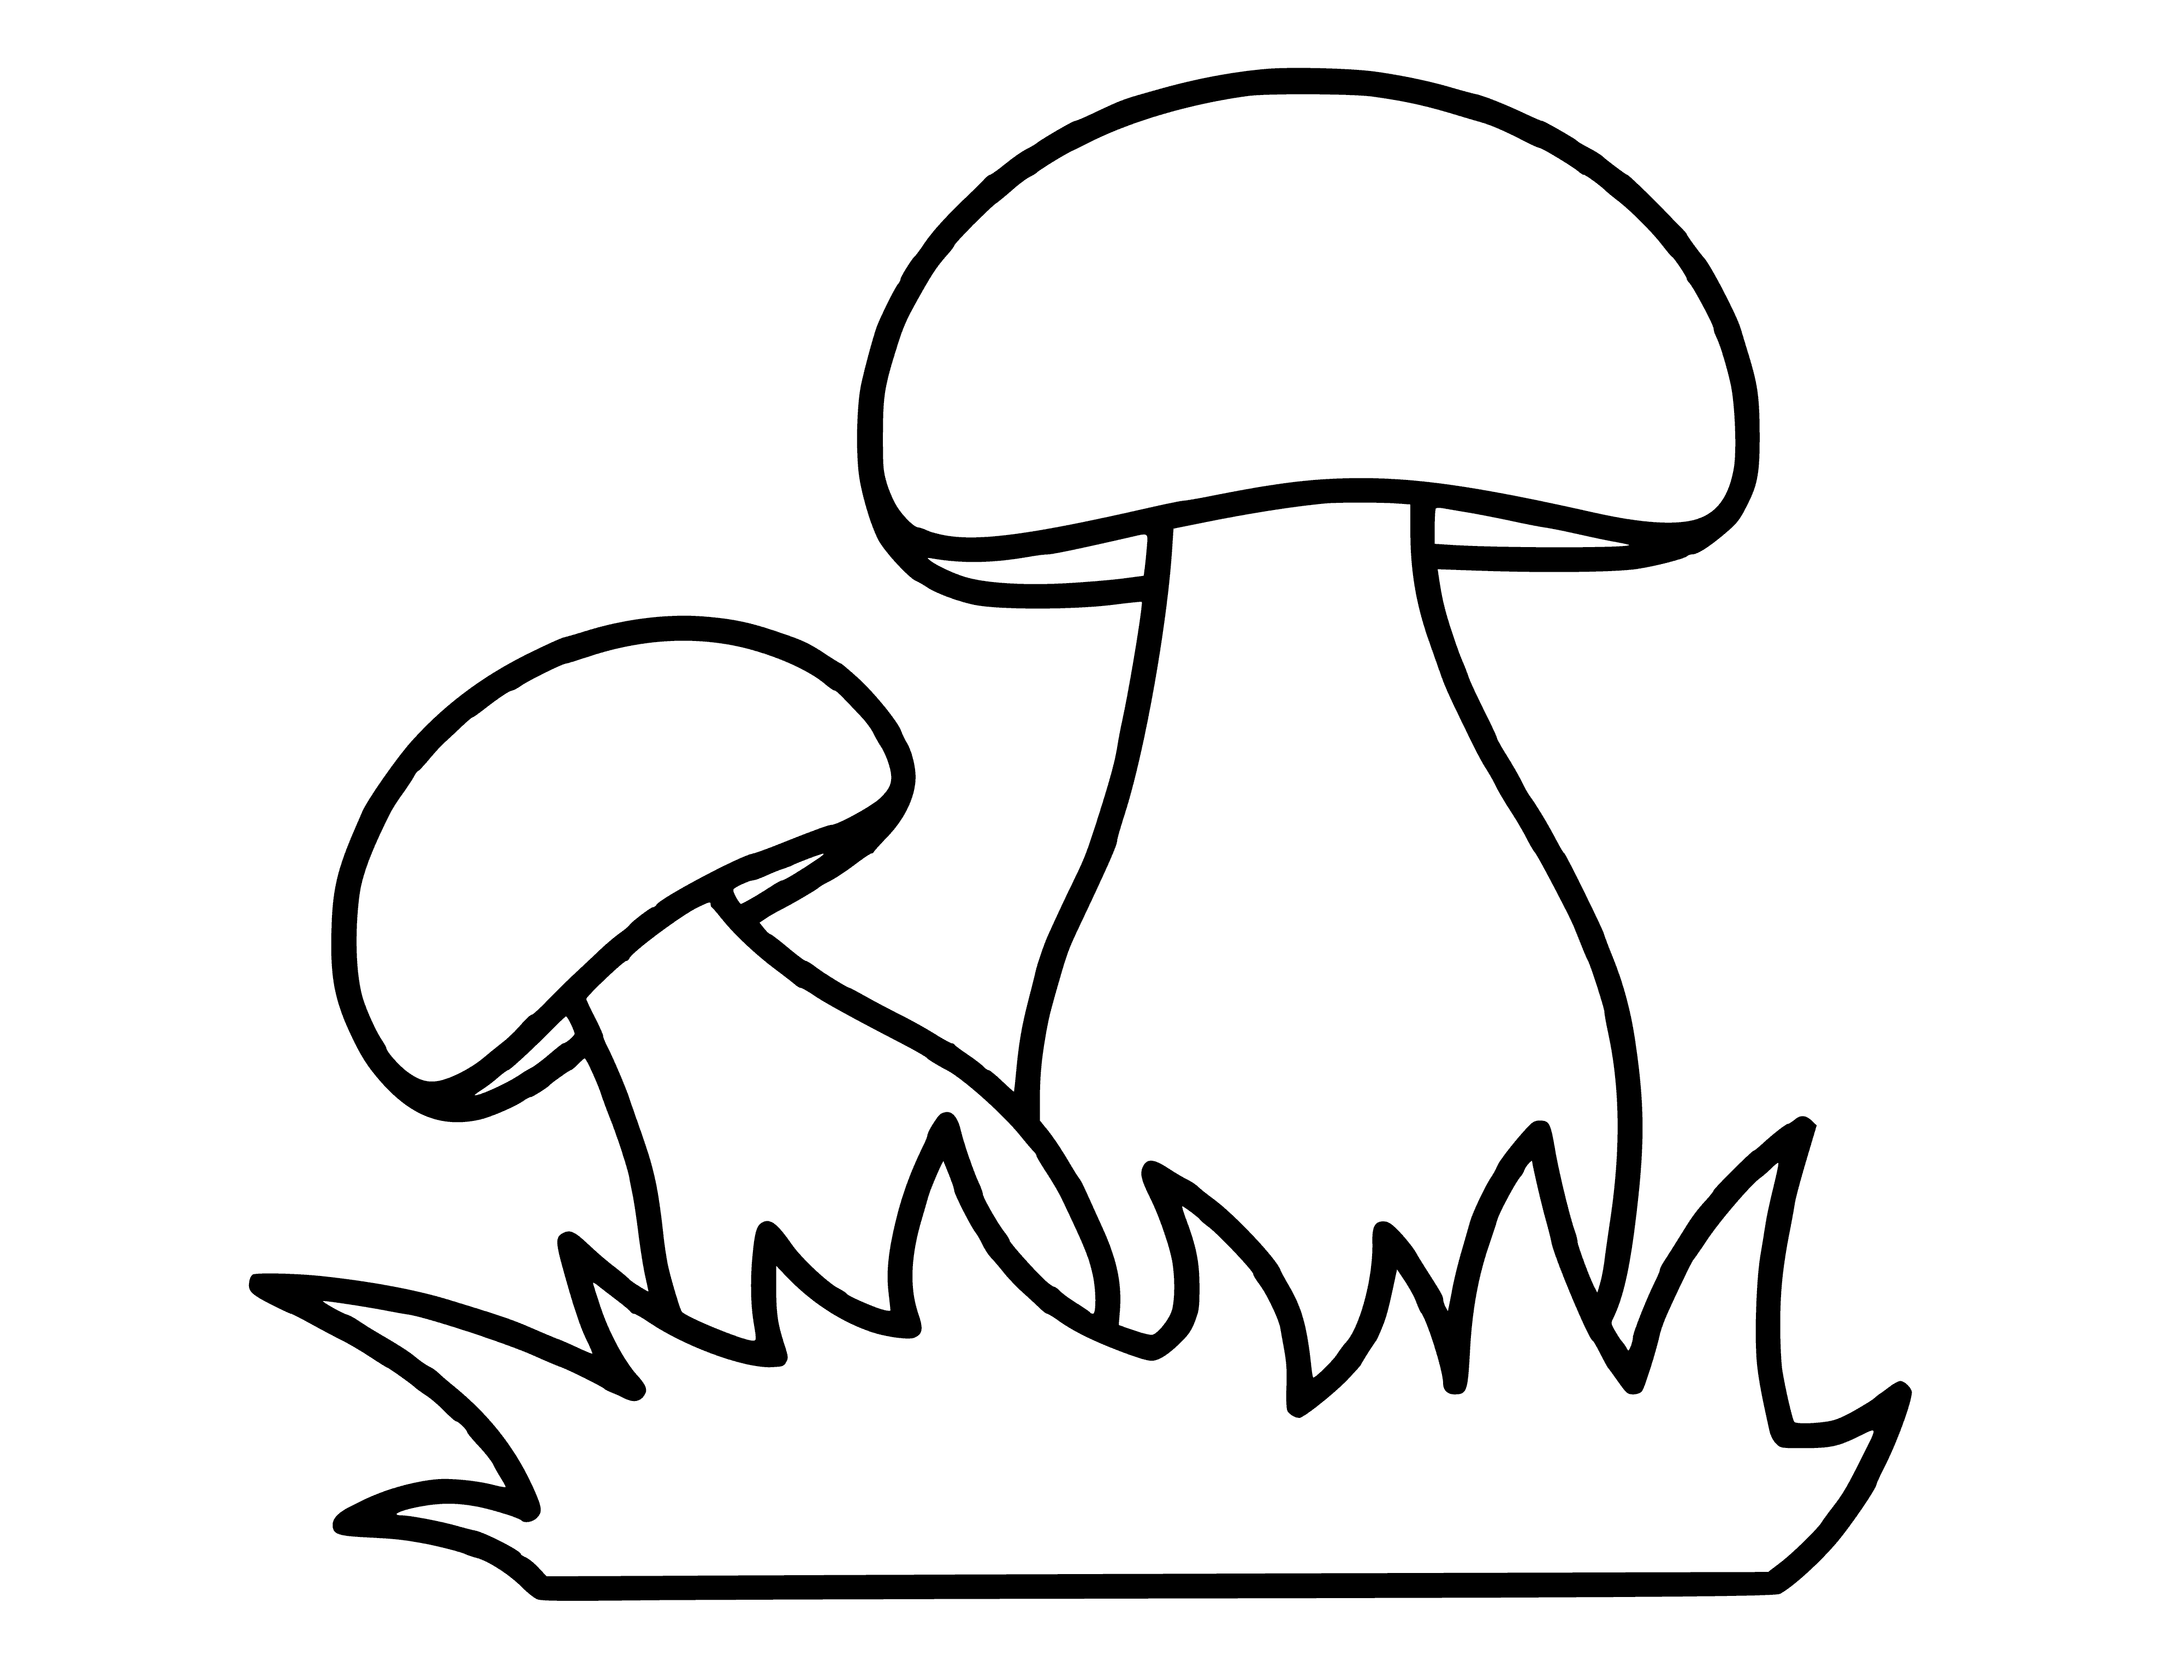 coloring page: Two white mushrooms sit on green grass in this coloring page. They have white caps and stems, no other colors. #coloringpagelovers